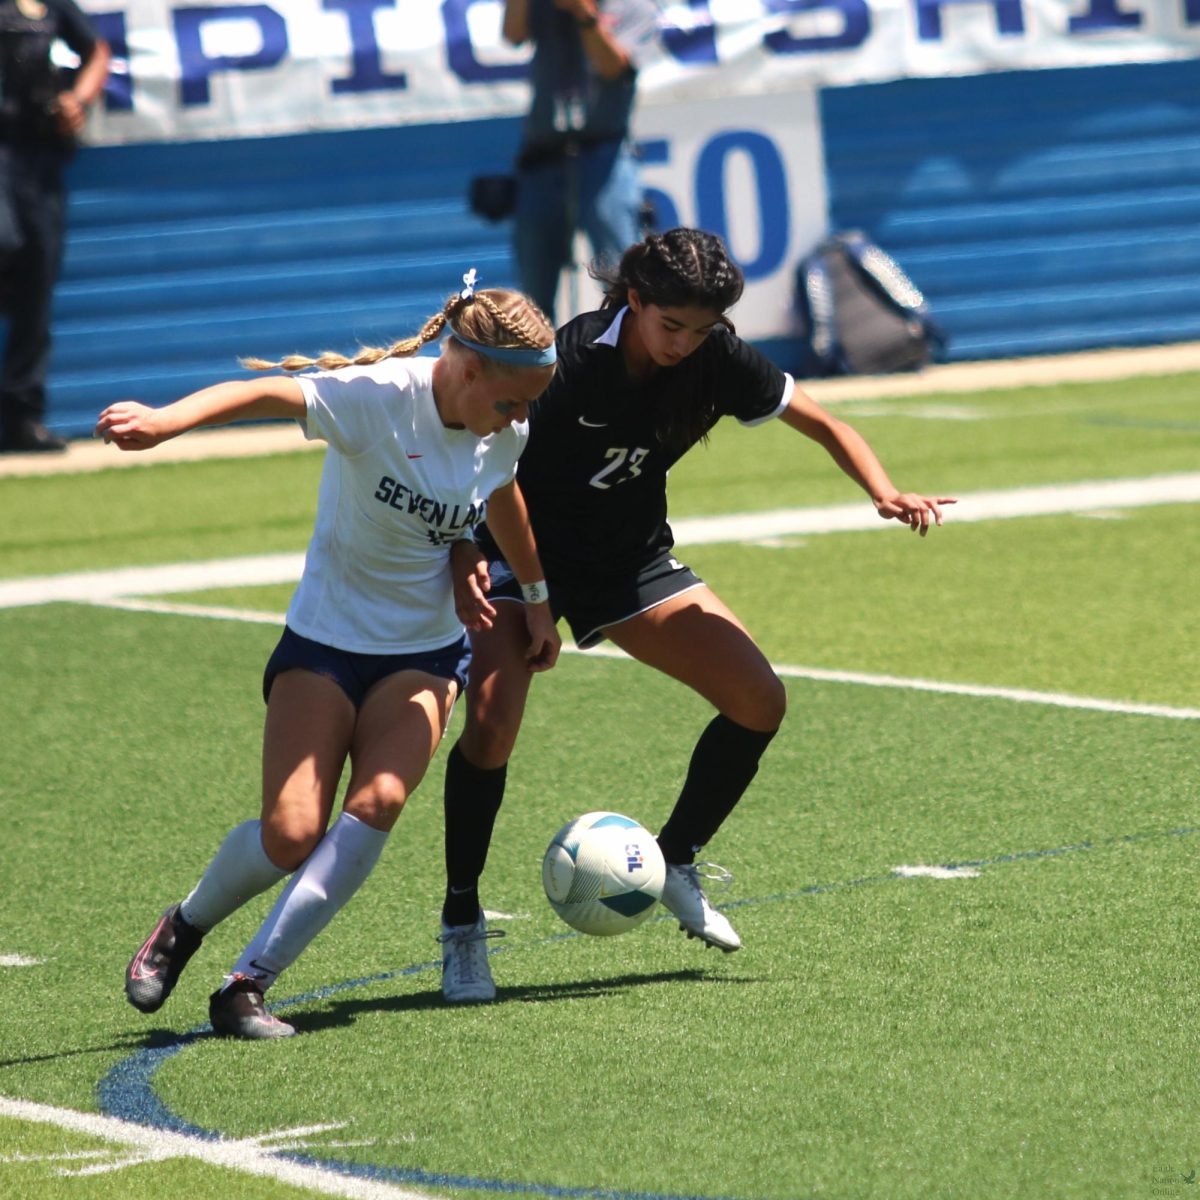 Eyes on the ball, freshman Samantha Tovar tries to block out the opponent. The Eagles end the season and make school history as they achieved their 1-0 win against Westlake during state finals. Along with this win, the Eagles are ranked no. 1 in state.